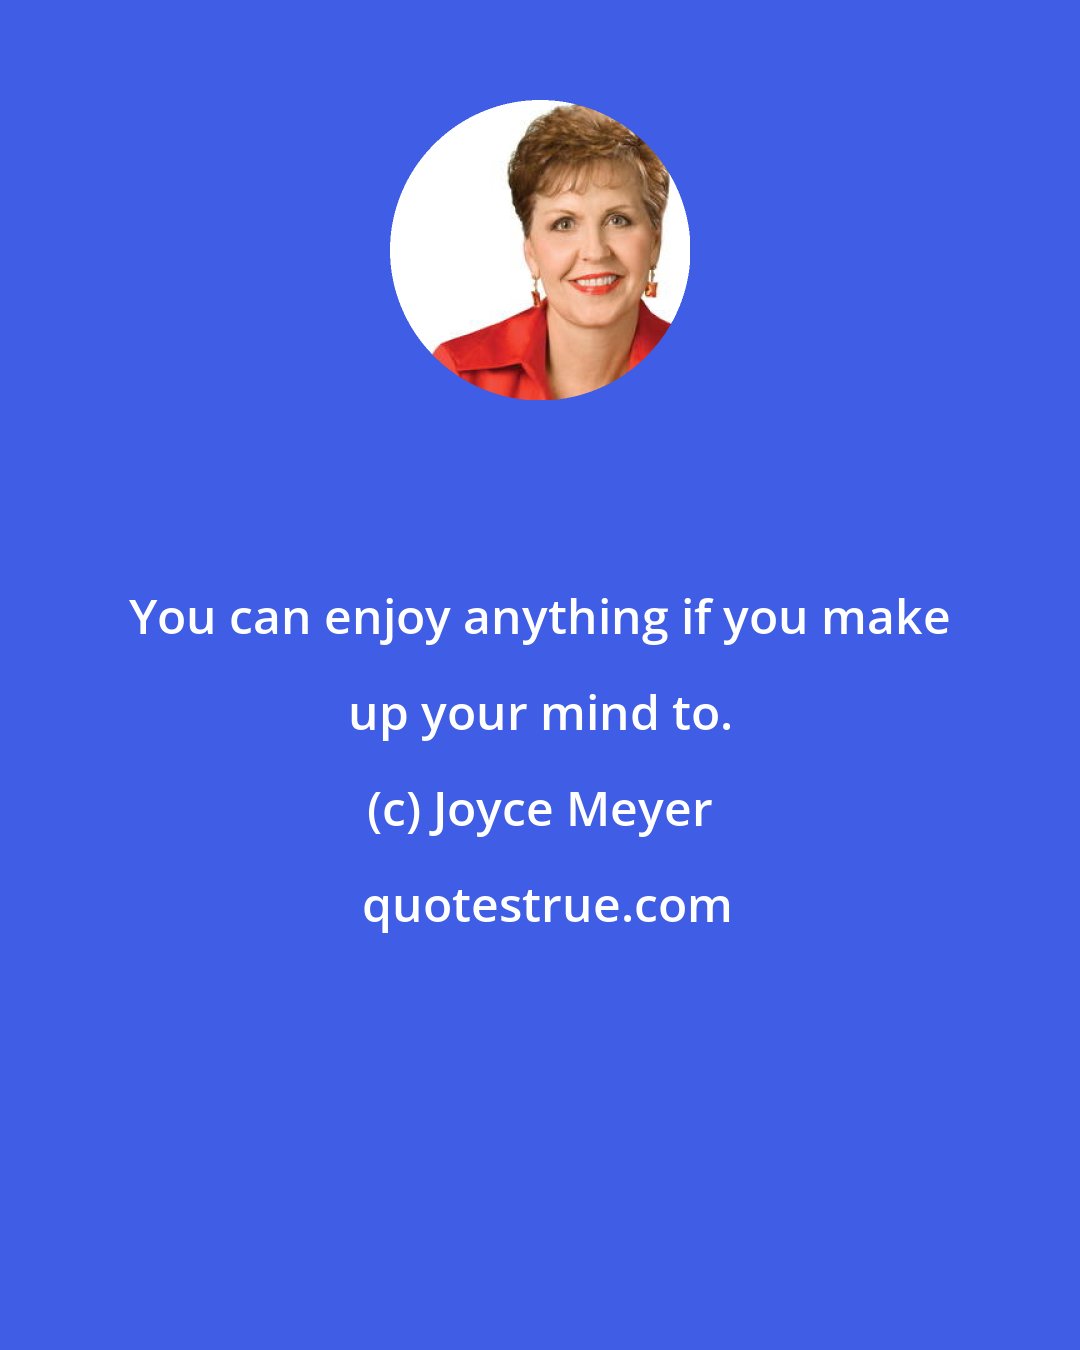 Joyce Meyer: You can enjoy anything if you make up your mind to.